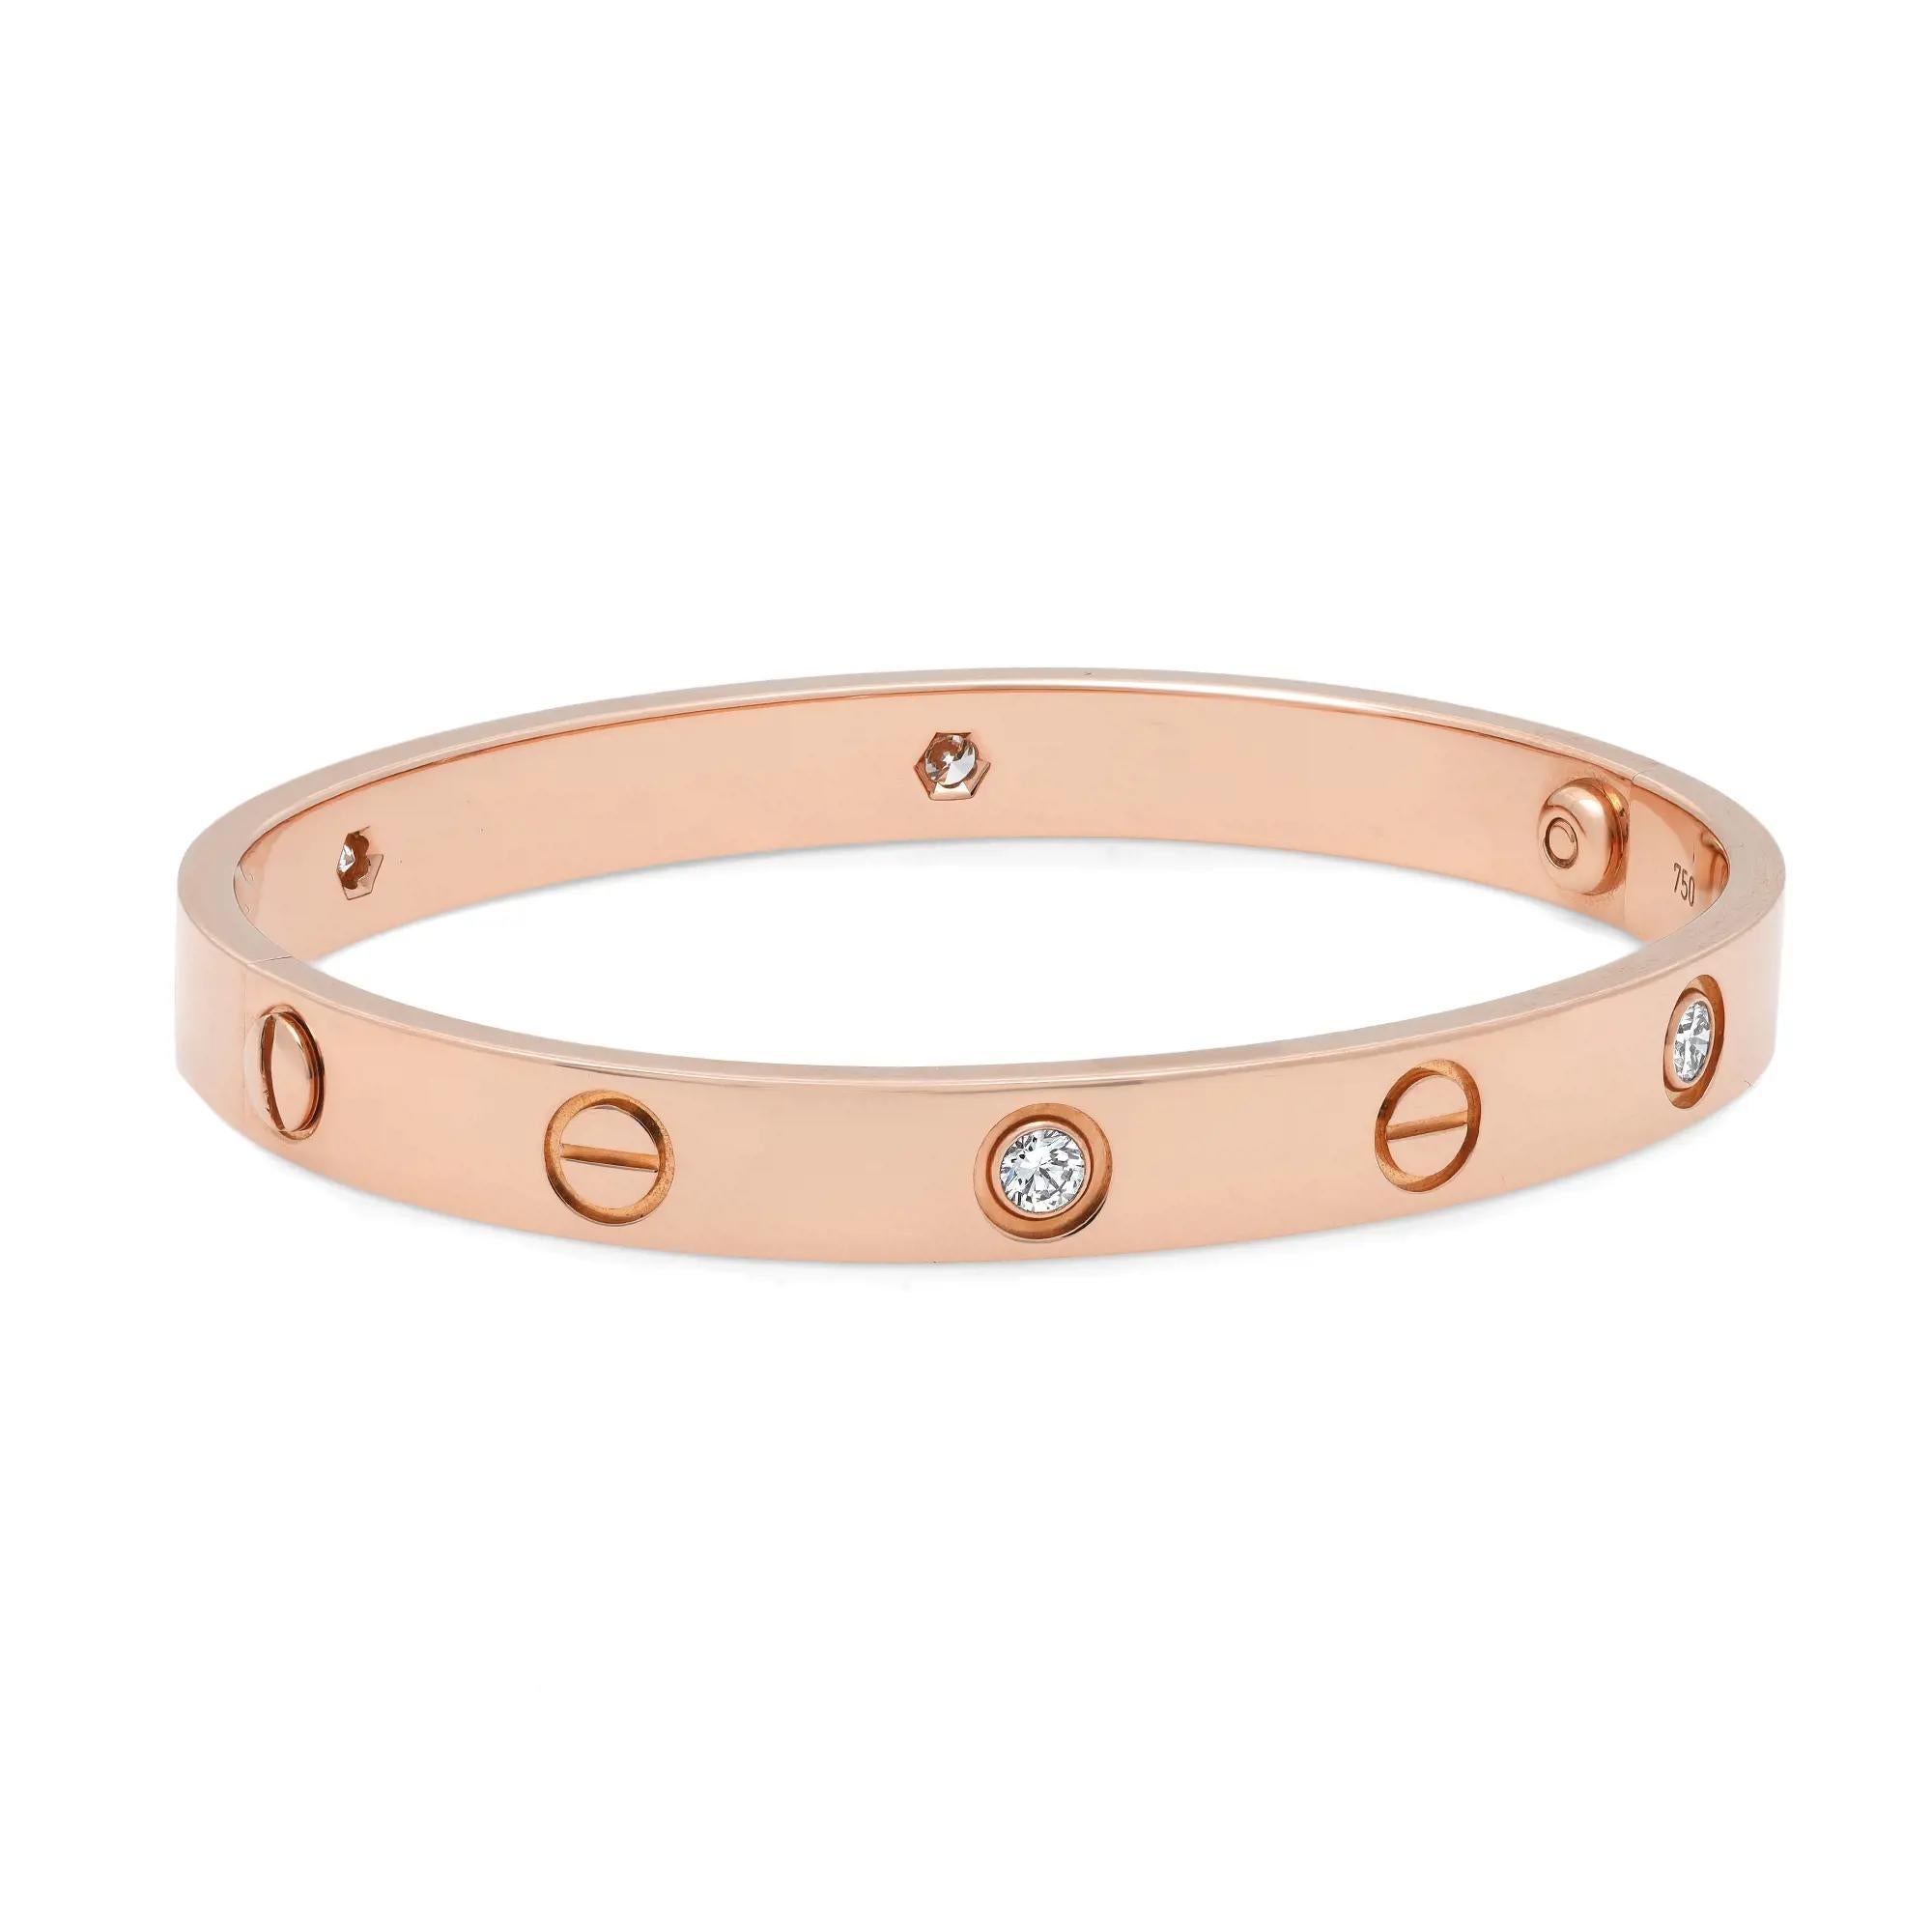 Cartier Love bracelet crafted in 18K rose gold, set with 4 round brilliant cut diamonds weighing 0.42 carats.  Width: 6.1mm. Size 19. Excellent pre-owned condition. The bracelet was just polished. Looks unworn. Comes with a screwdriver, box and